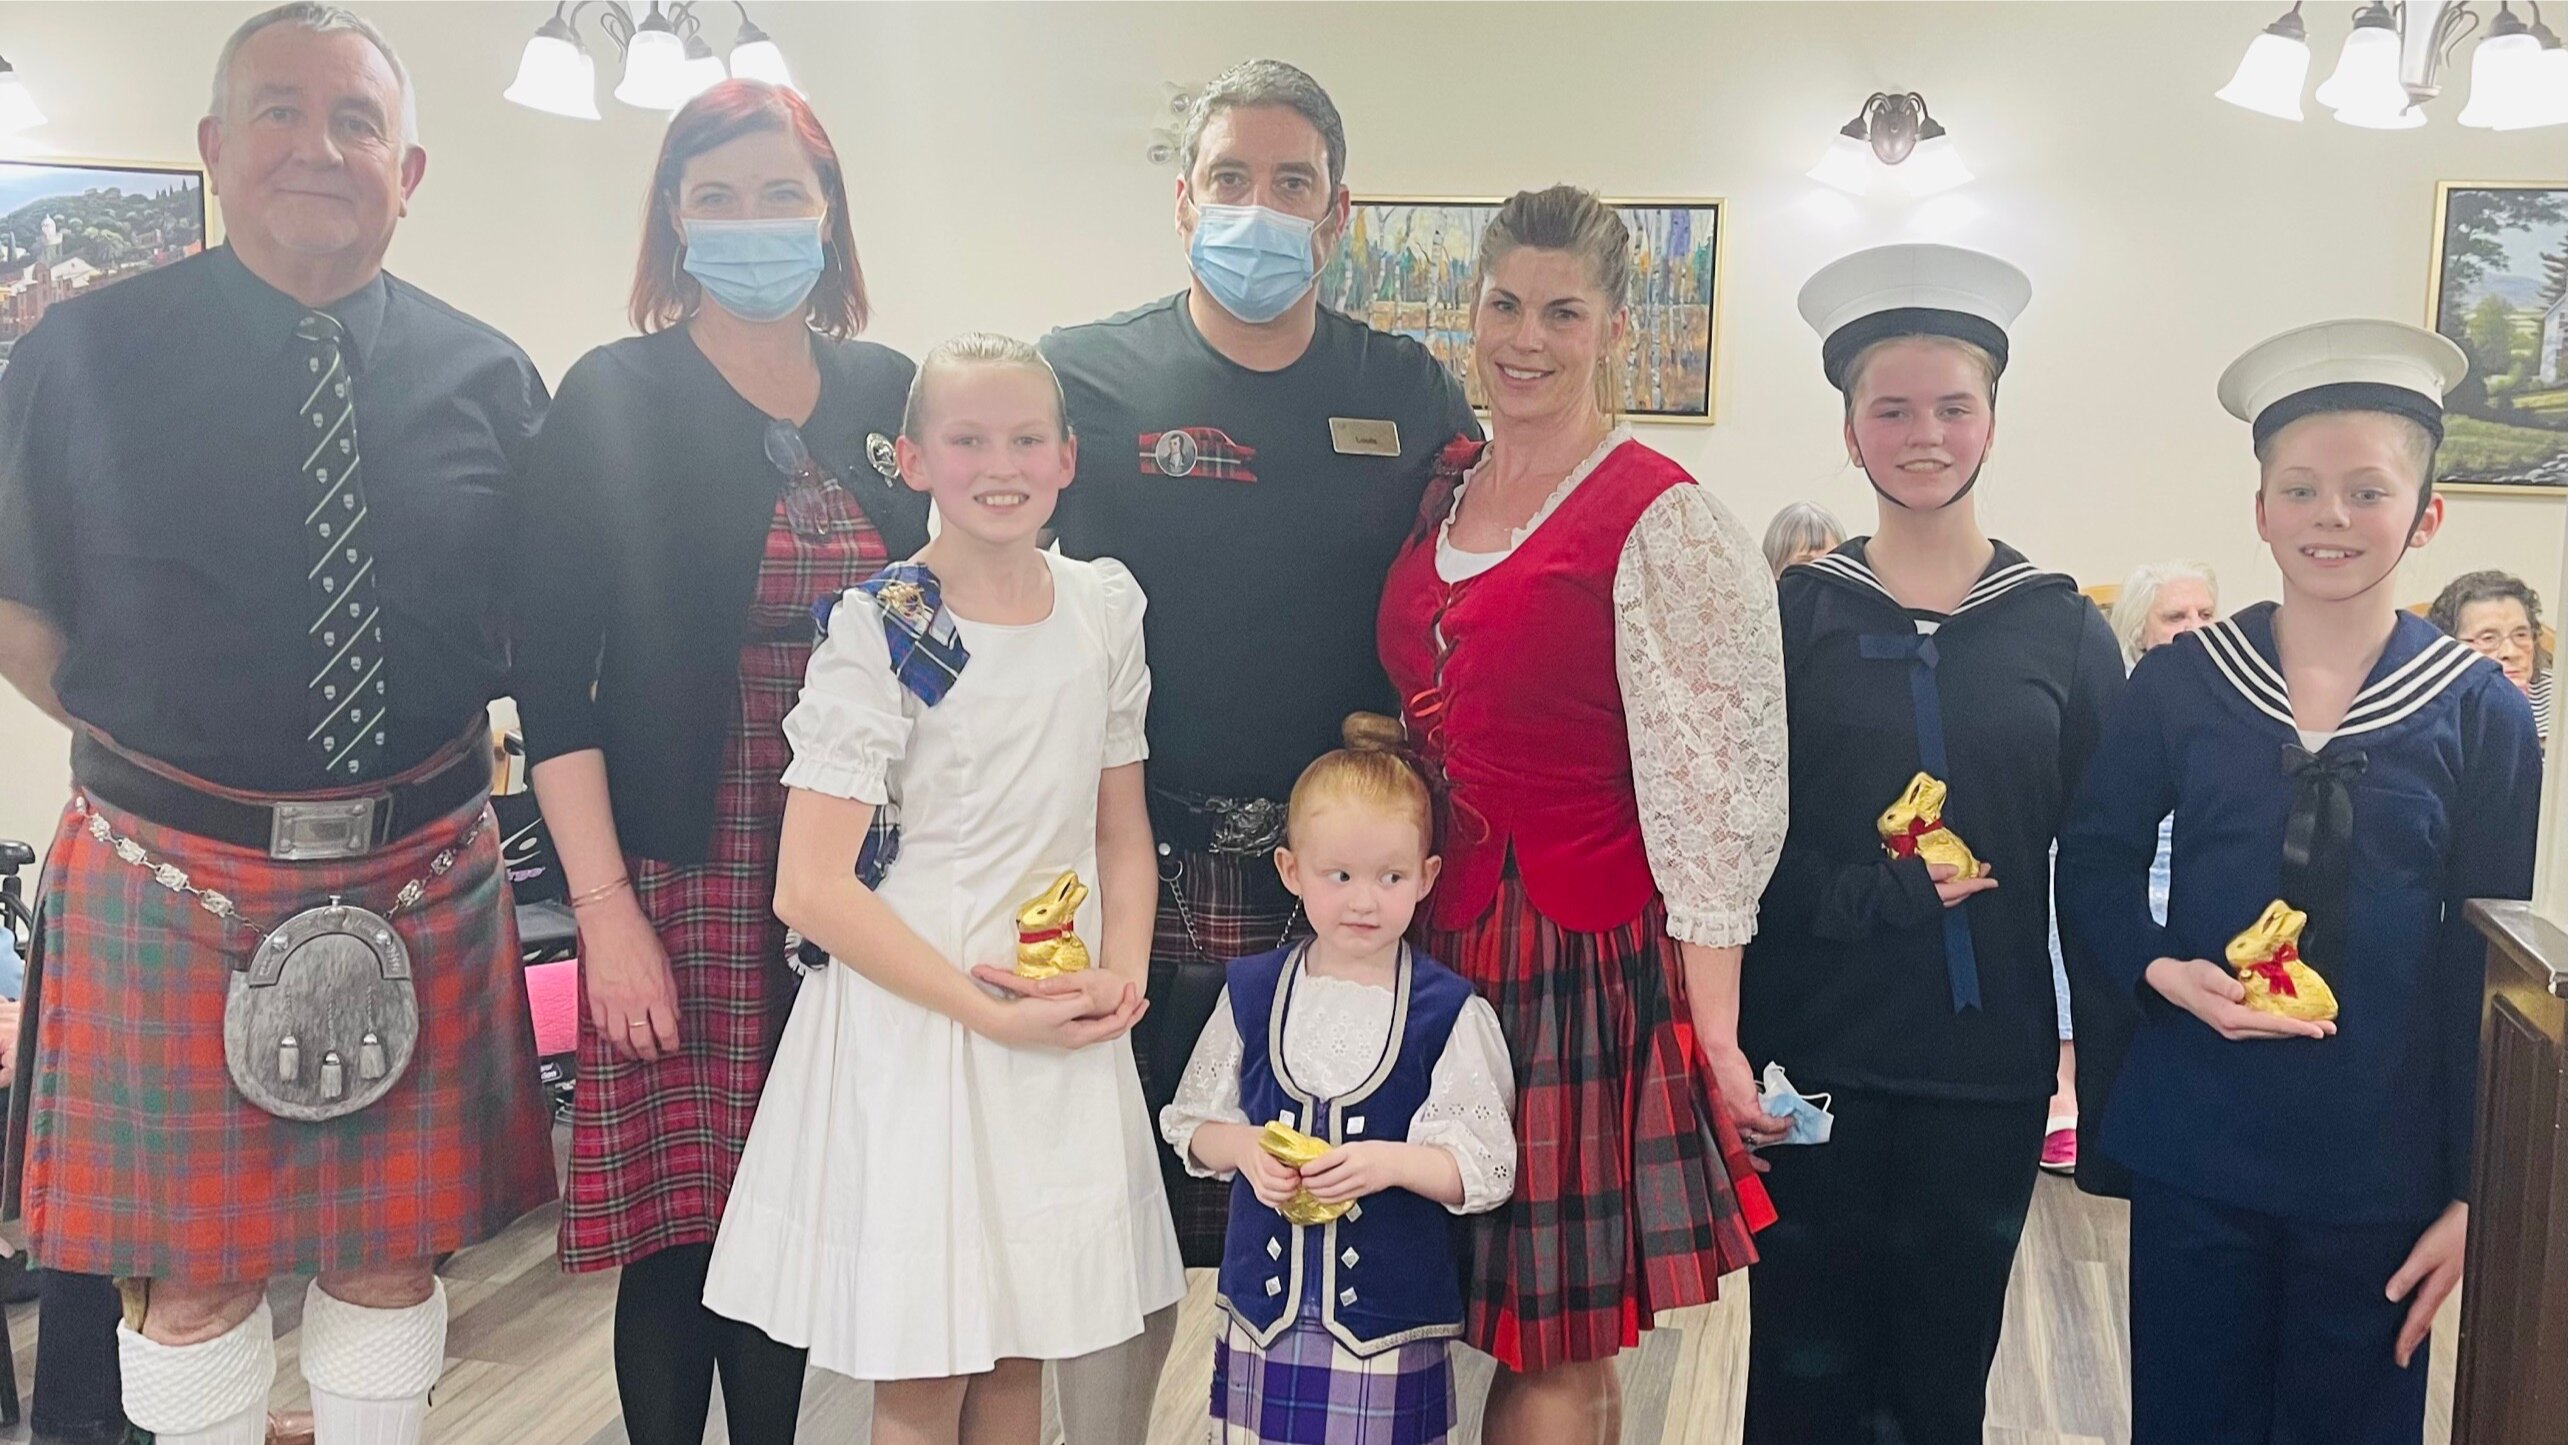 A picture of a family in Scottish outfits in a retirement home